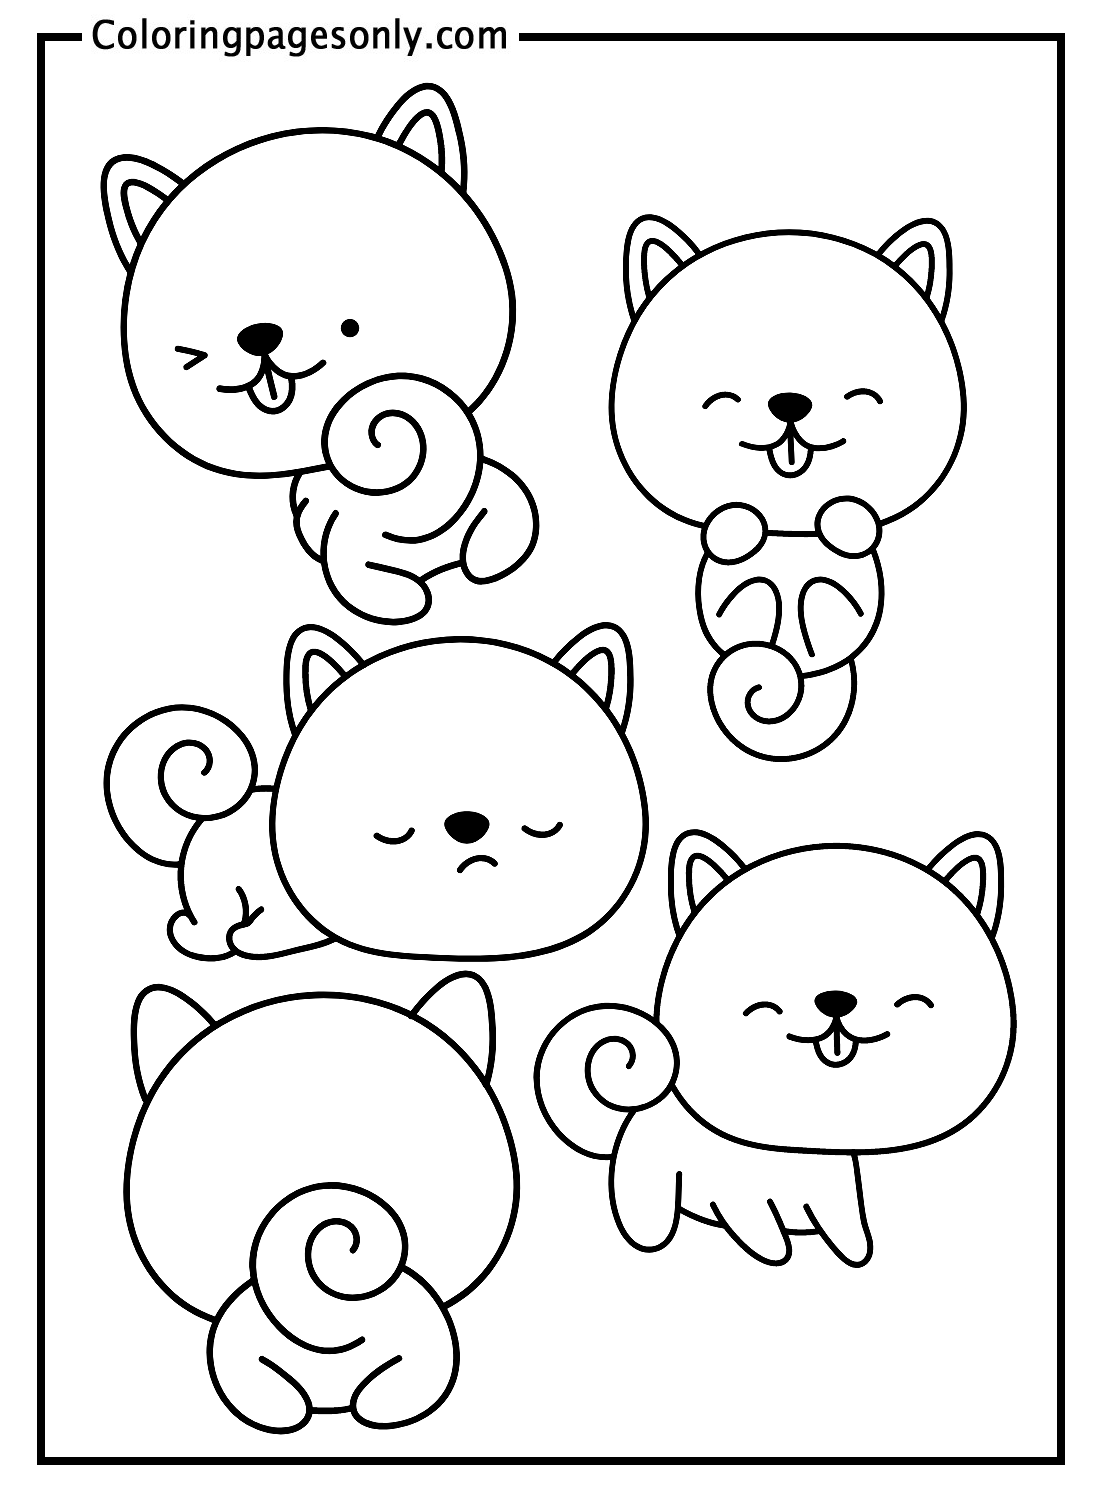 Dog With Thank You Sticker Coloring Pages